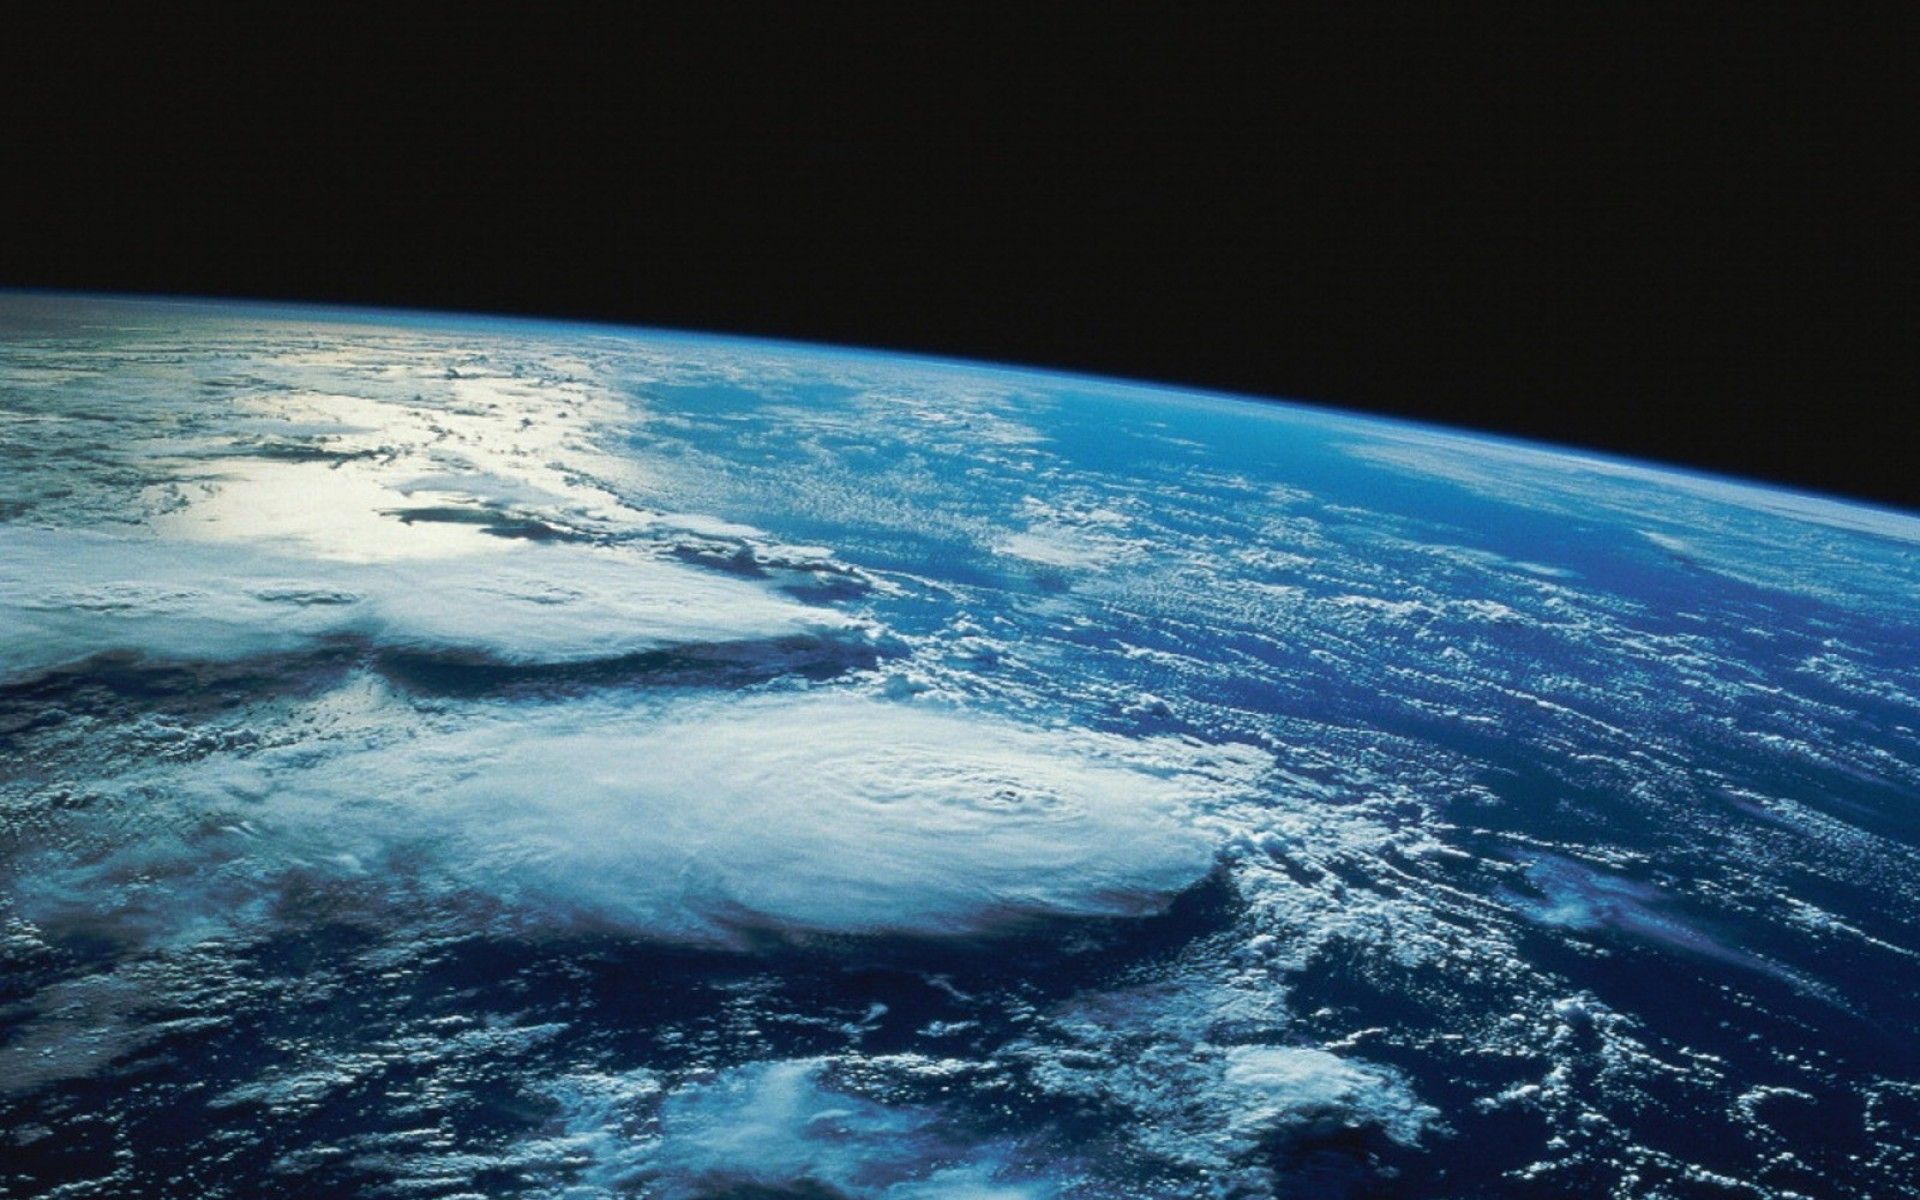 Hurricane clouds on the Earth&;s surface wallpaper and image. Earth from space, Earth atmosphere, Earth